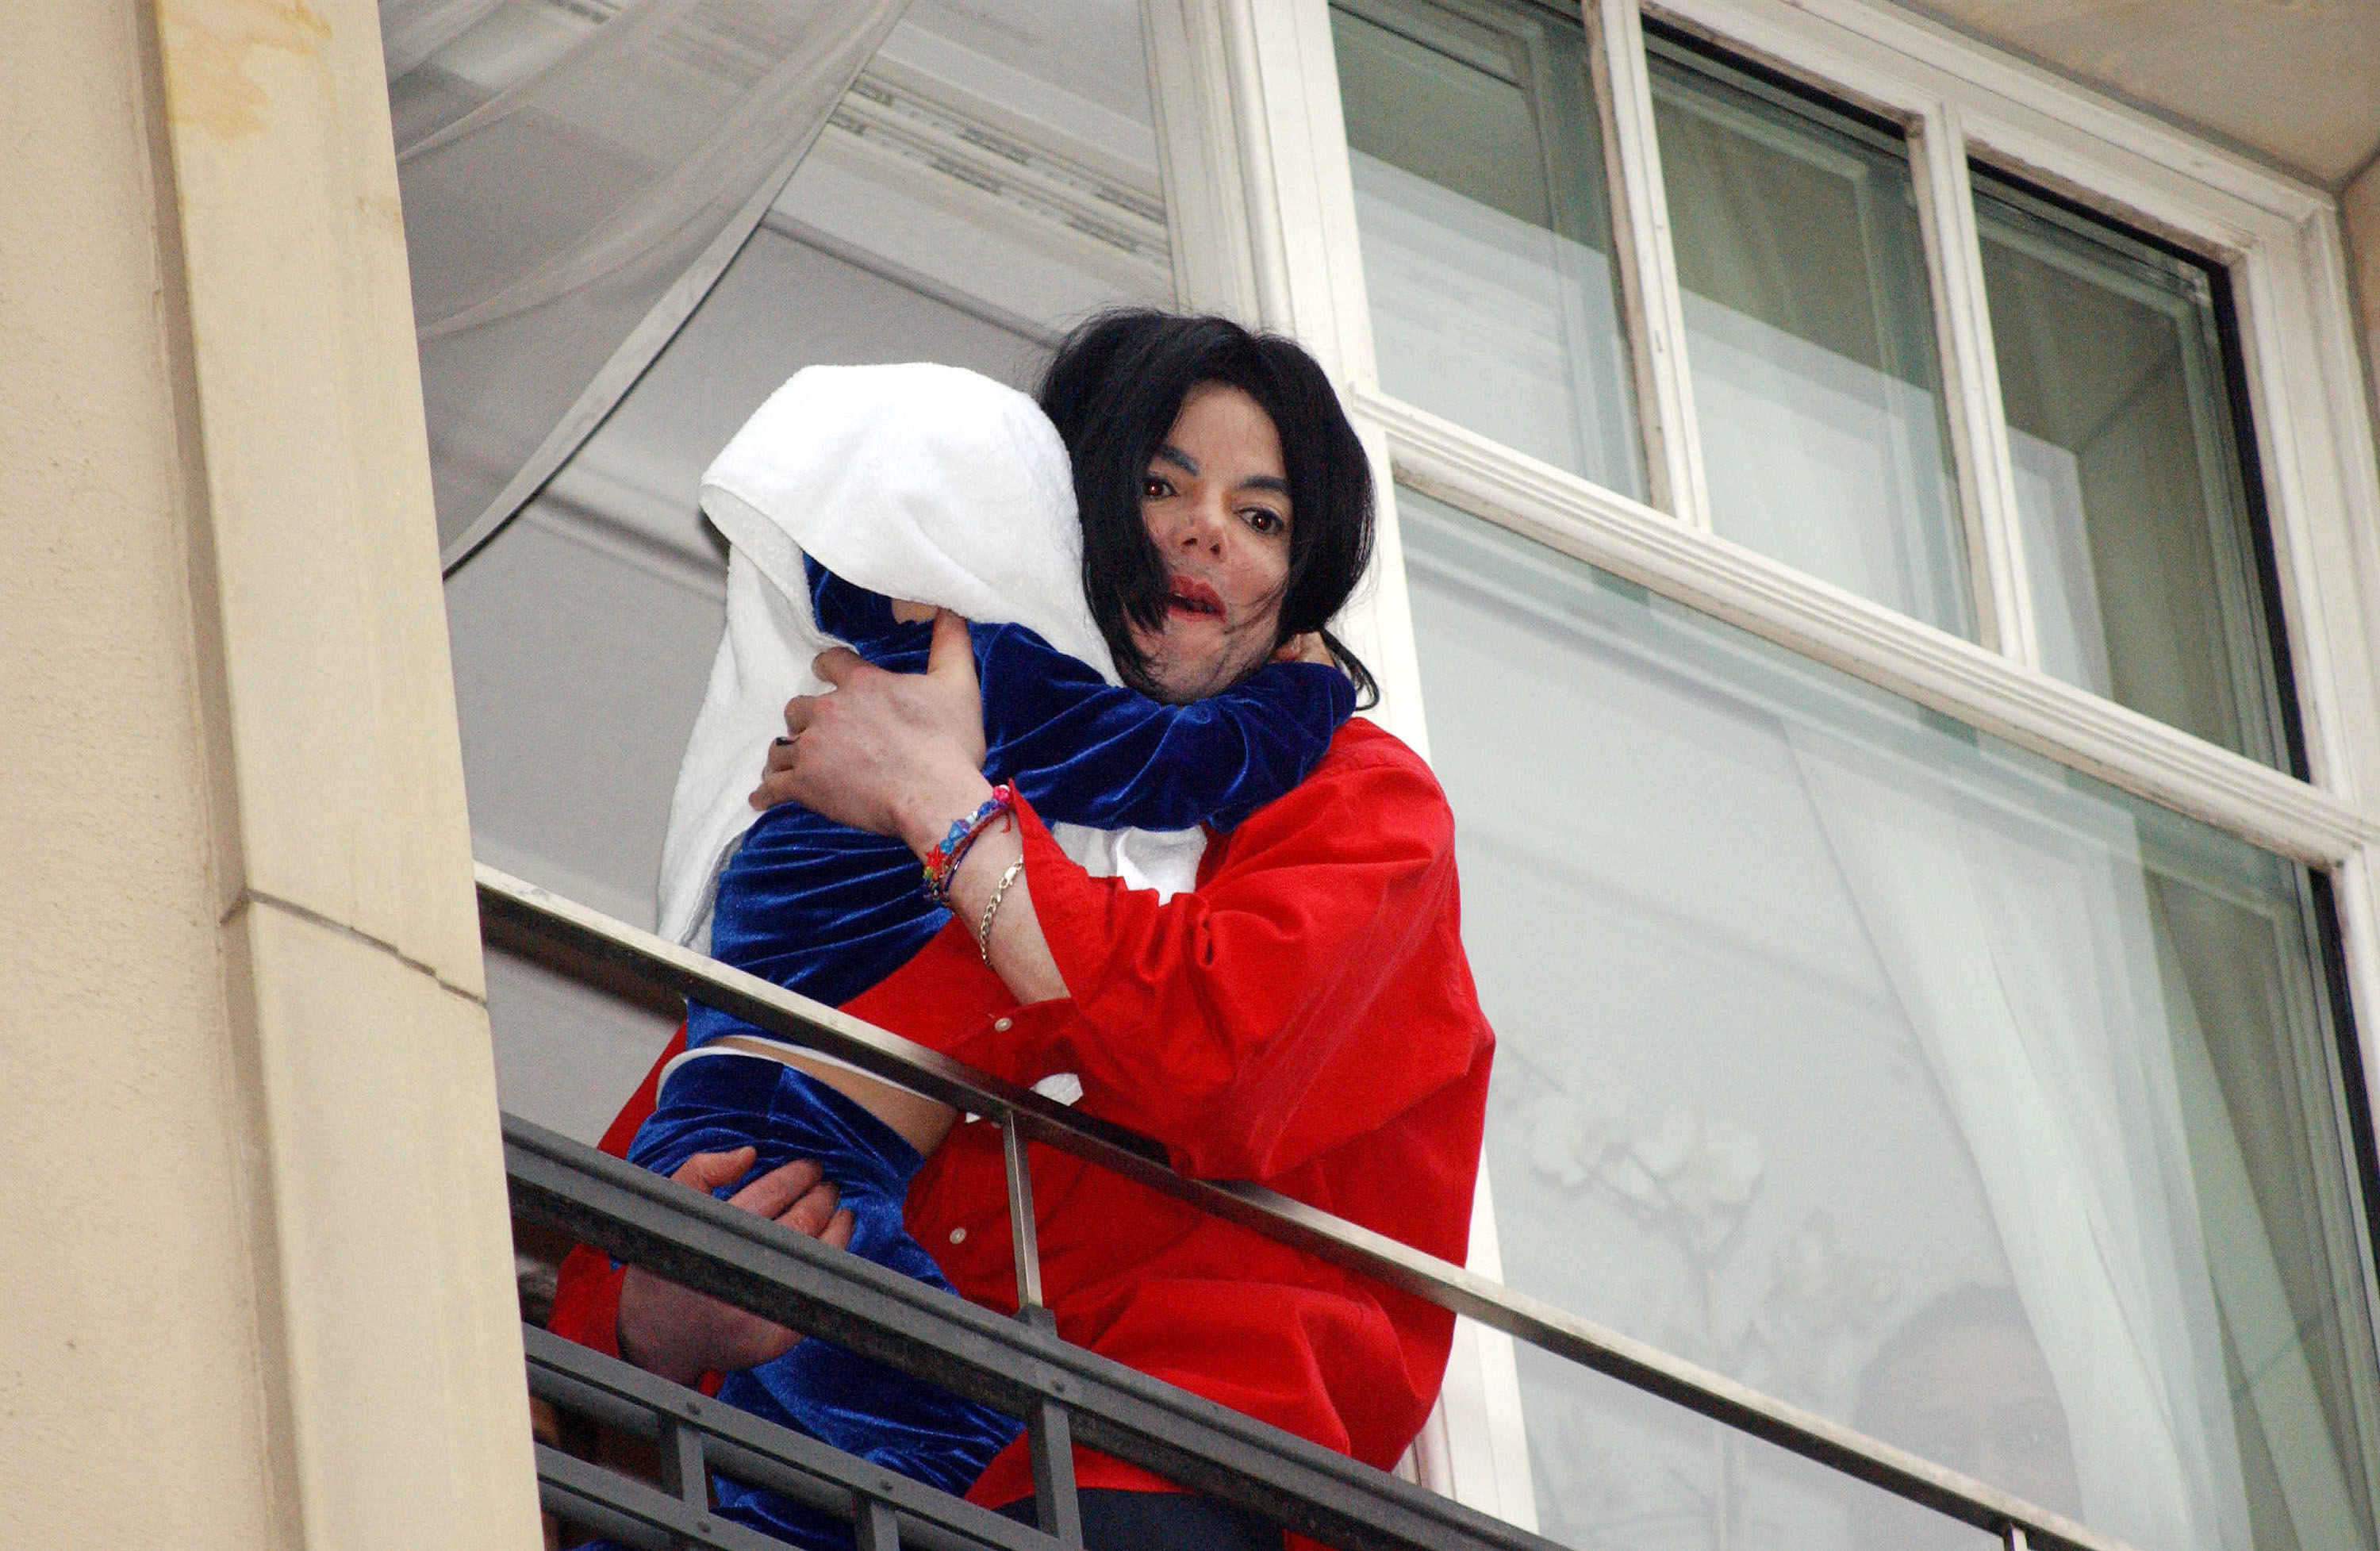 Michael Jackson holds child that has a towel over his head